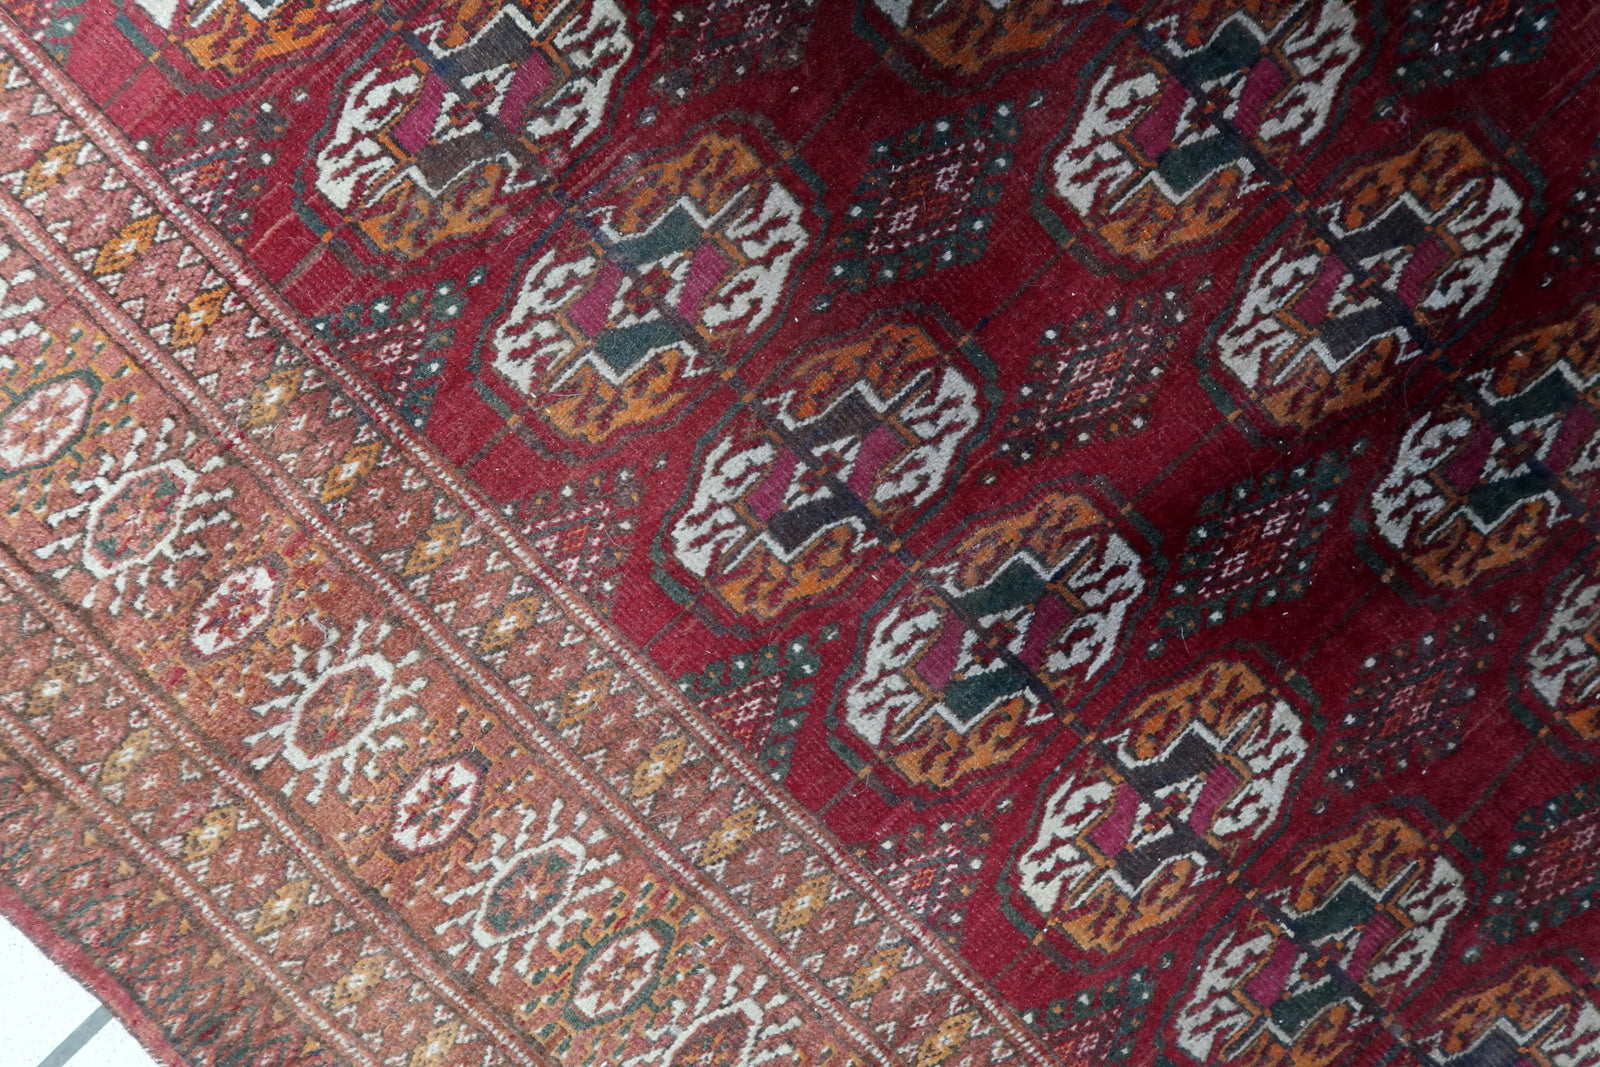 Detailed view of the low pile condition on the Handmade Vintage Uzbek Bukhara Rug